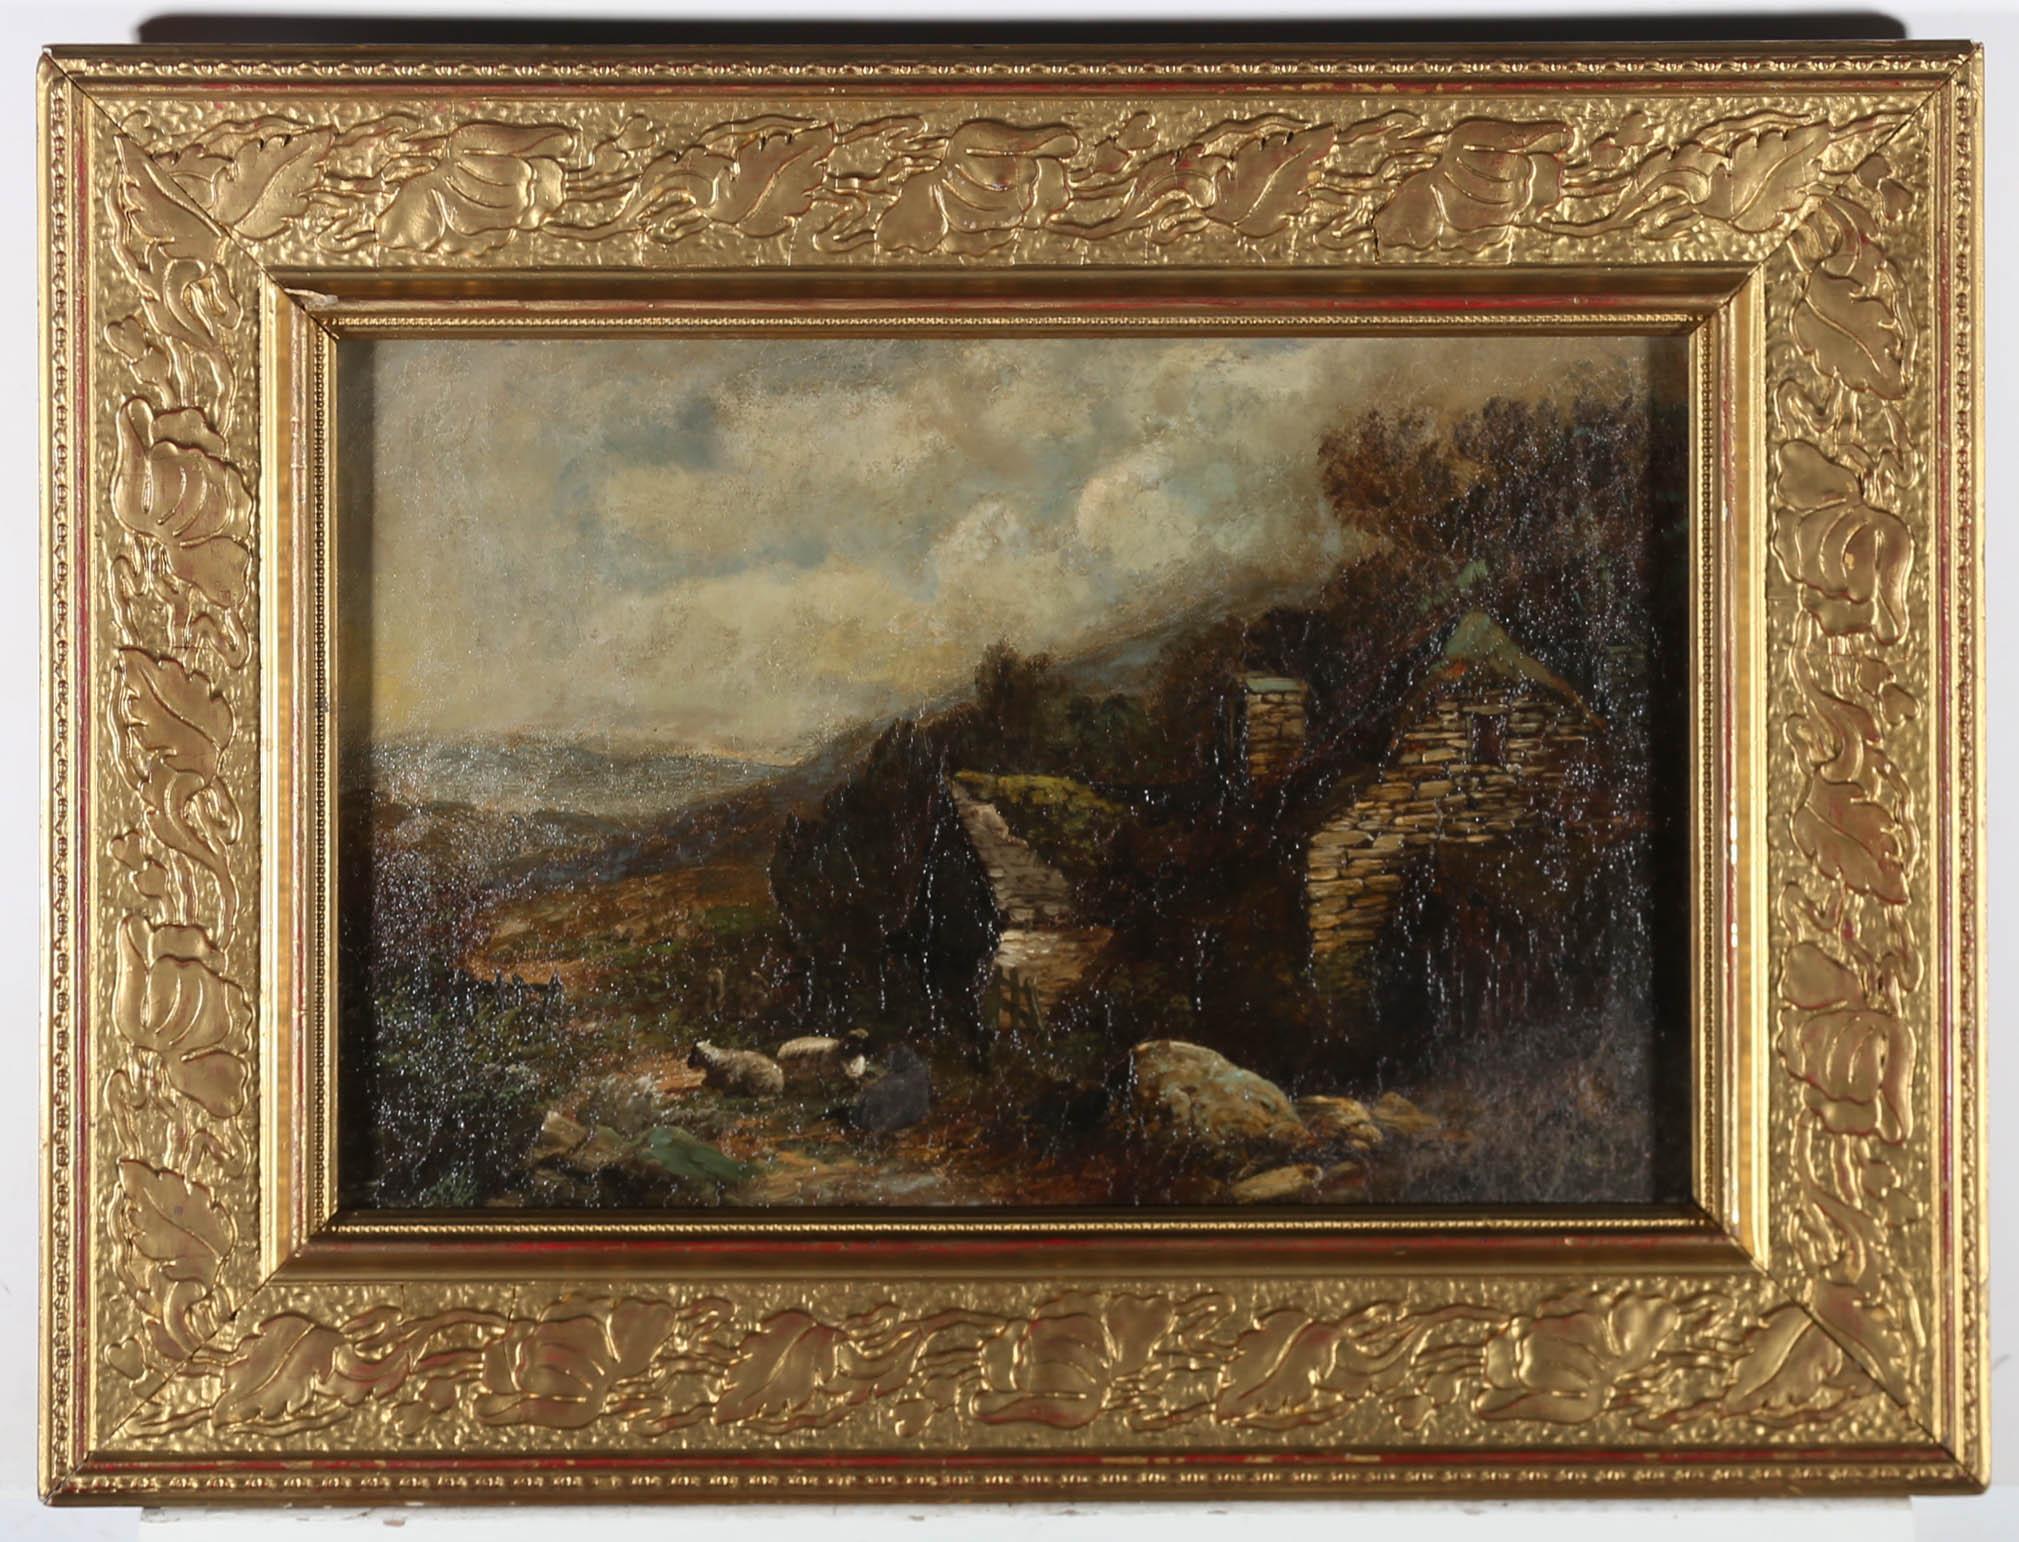 A charming depiction of a sheep farmer's cottage, hidden in the beautiful Welsh hills. Attractively presented in a period gilt frame with foliate members and delicate running pattern detail. Unsigned. On canvas on stretchers. 